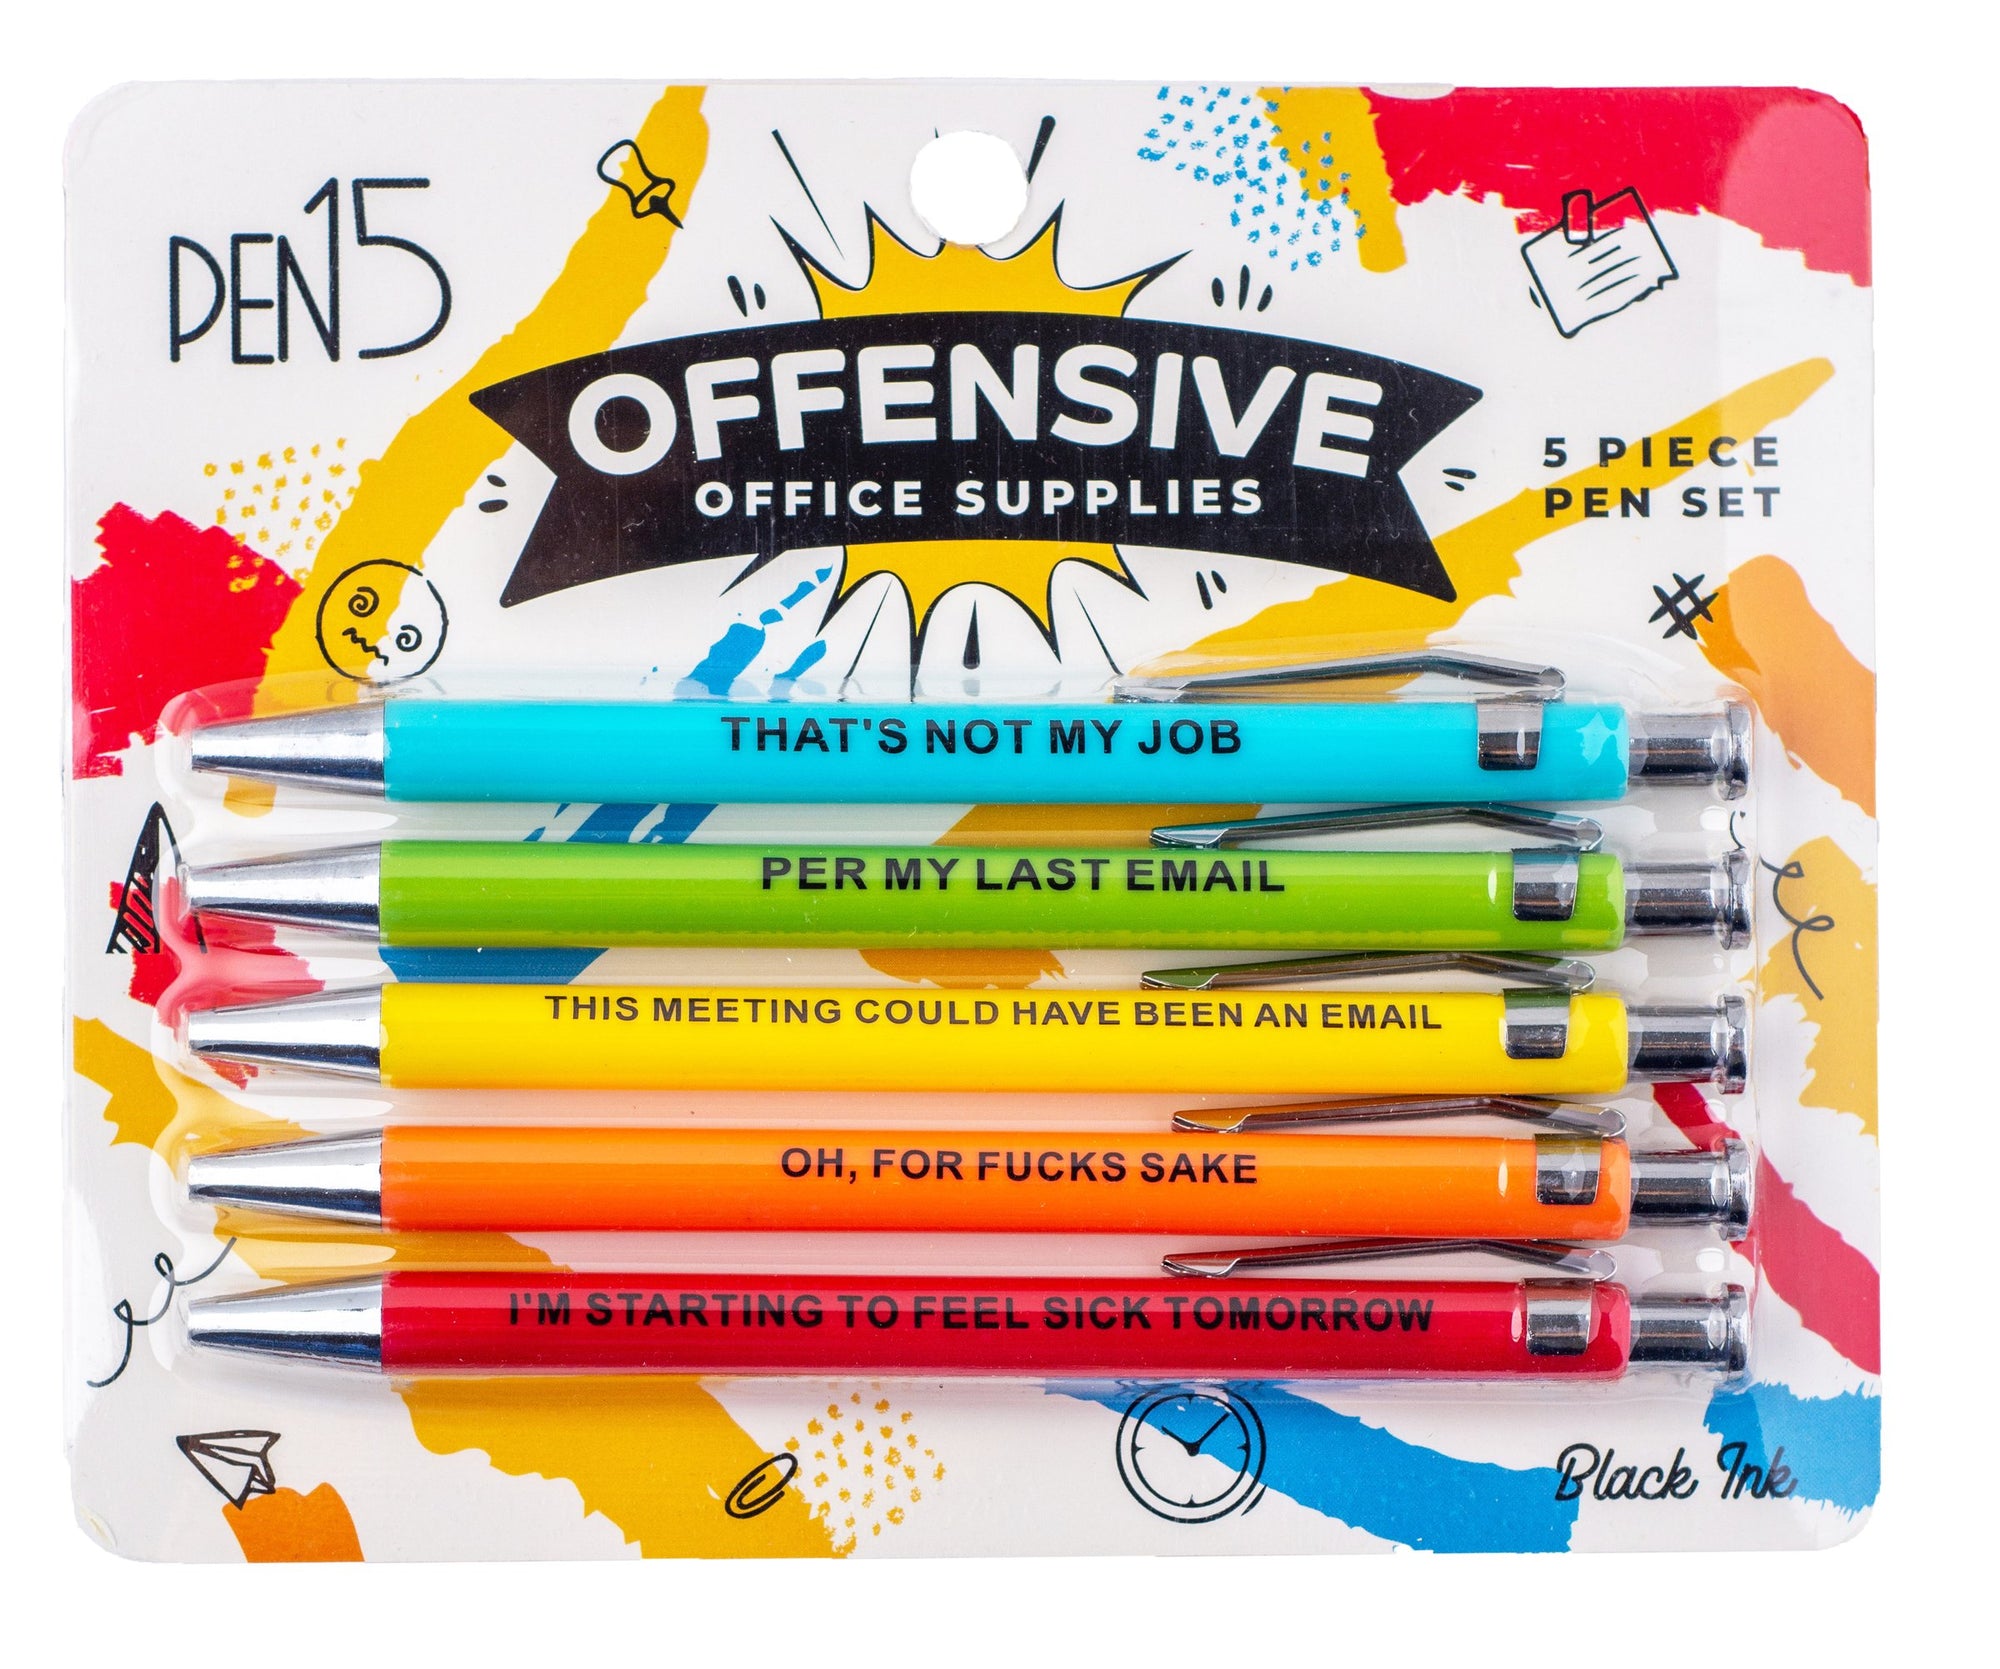 Offensive Crayons - Dicks By Mail - Anonymously mail a bag of dicks